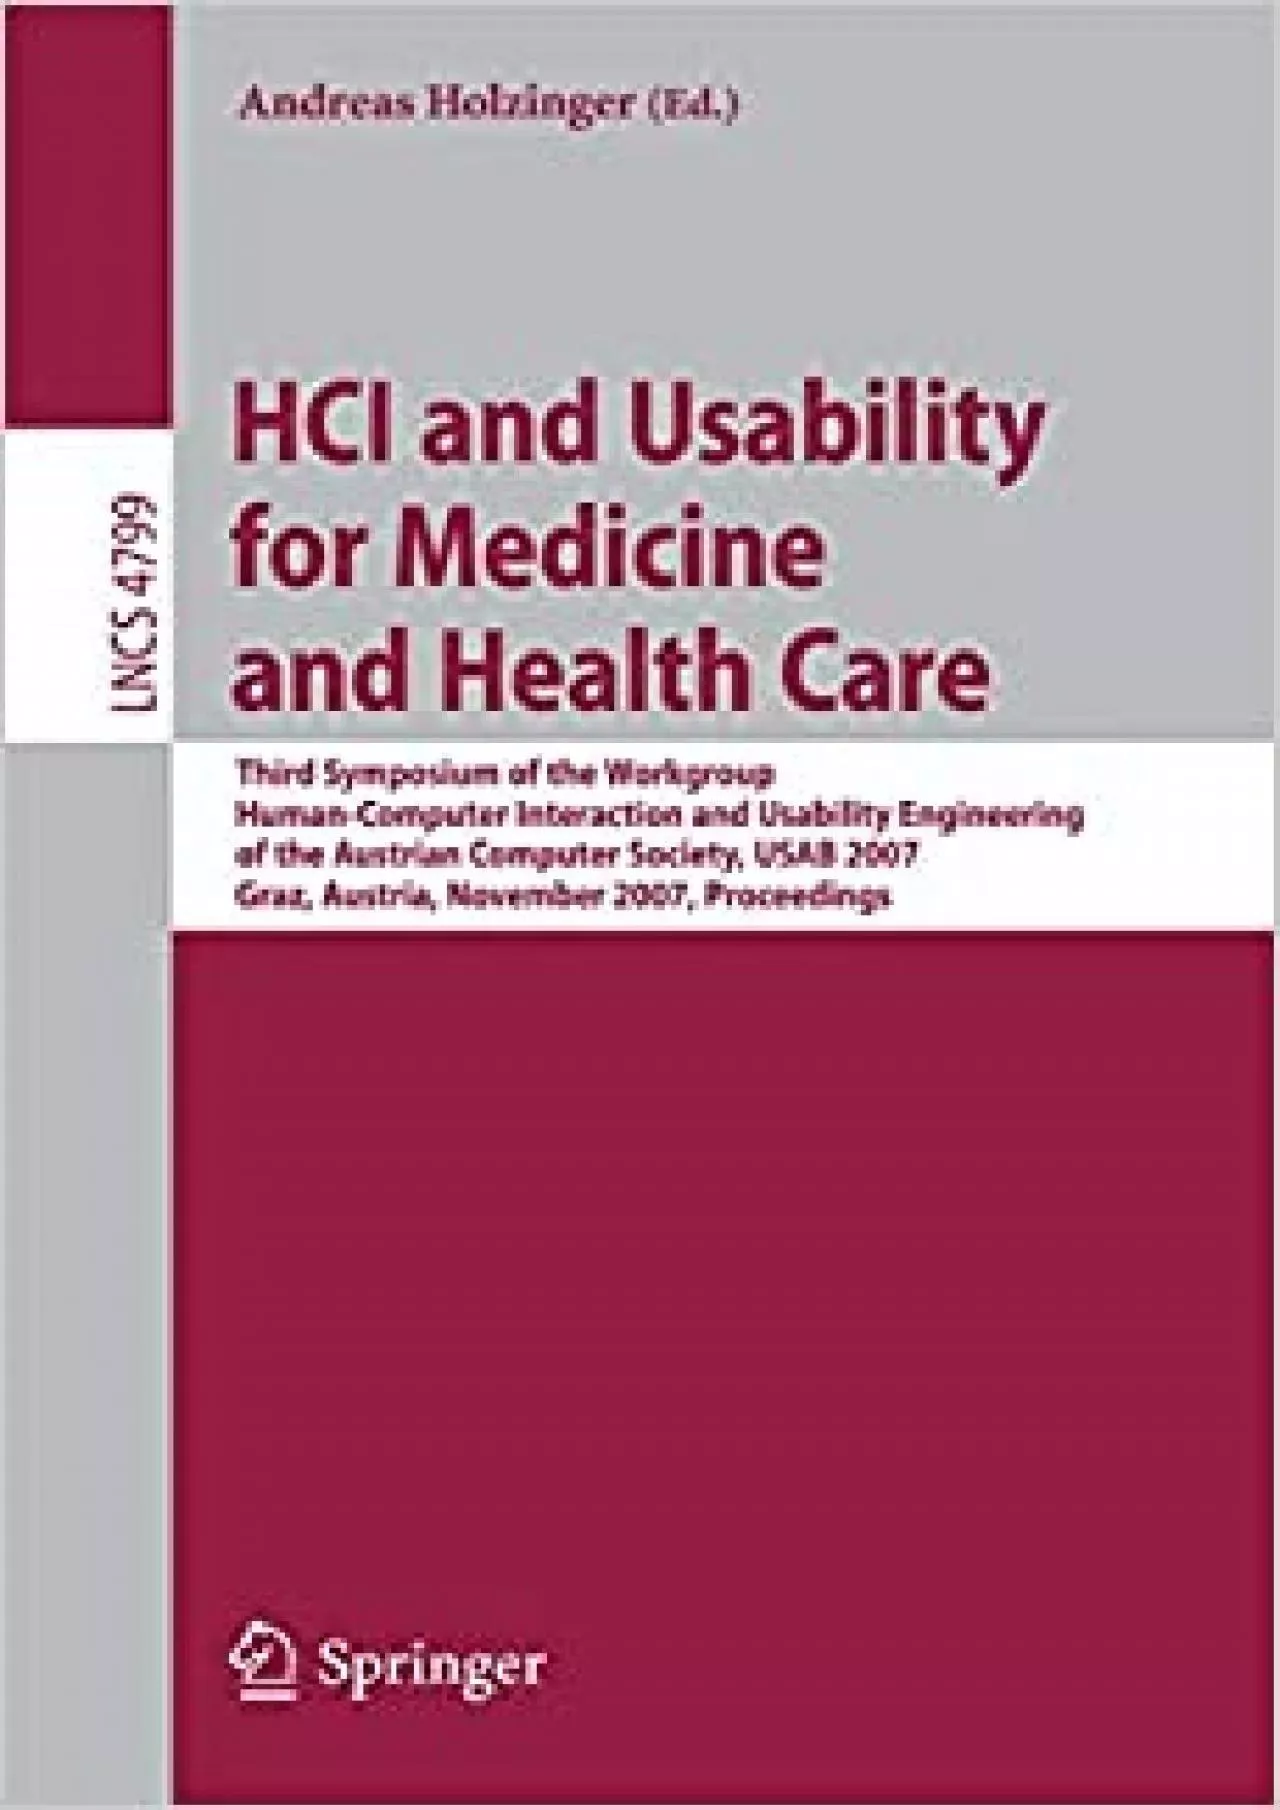 (BOOS)-HCI and Usability for Medicine and Health Care Third Symposium of the Workgroup